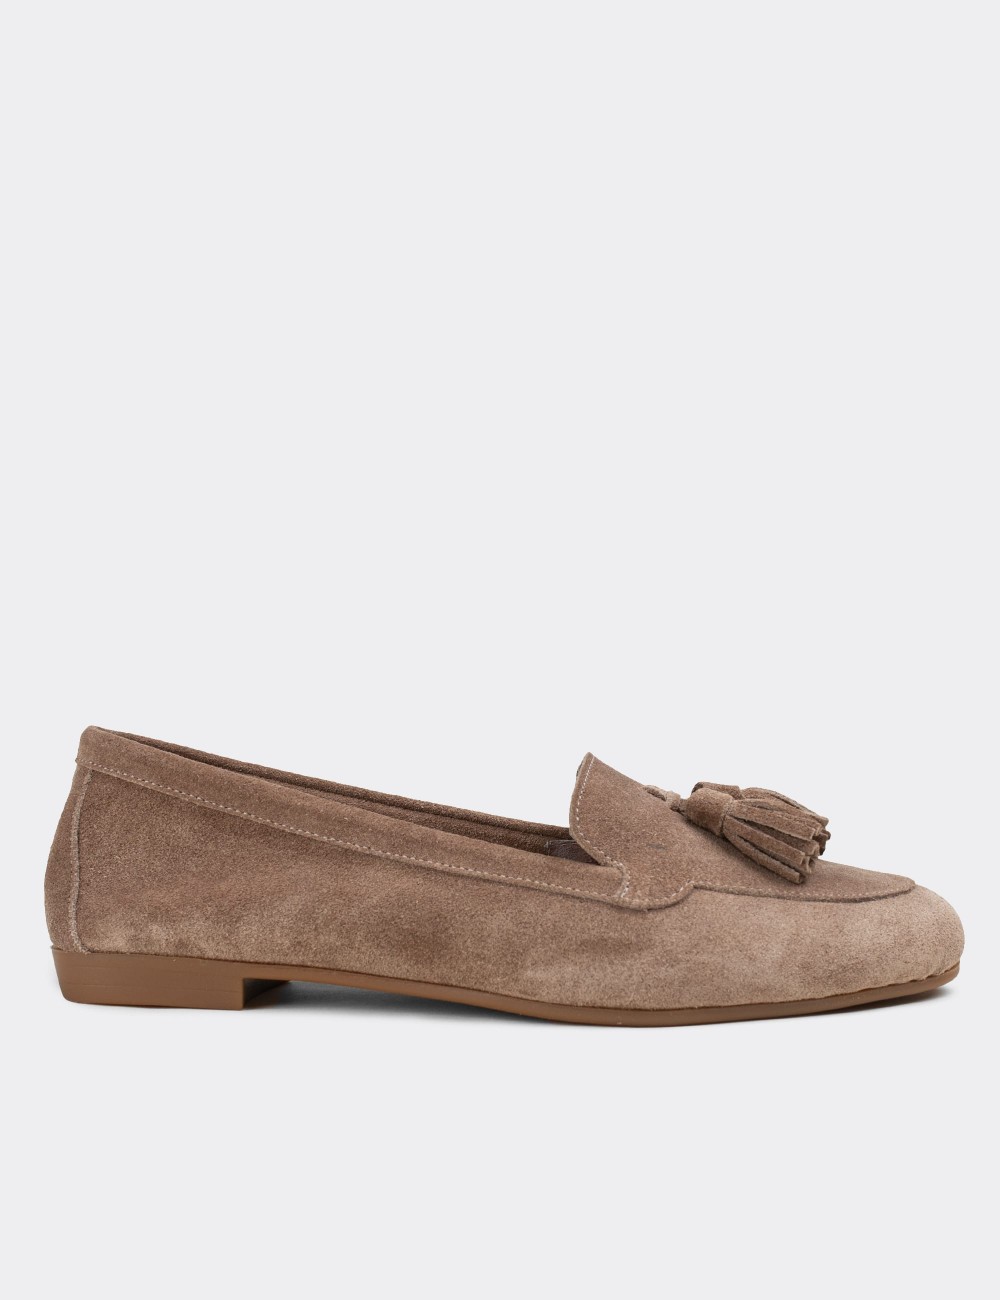 Beige Suede Leather Loafers - E3209ZBEJC01